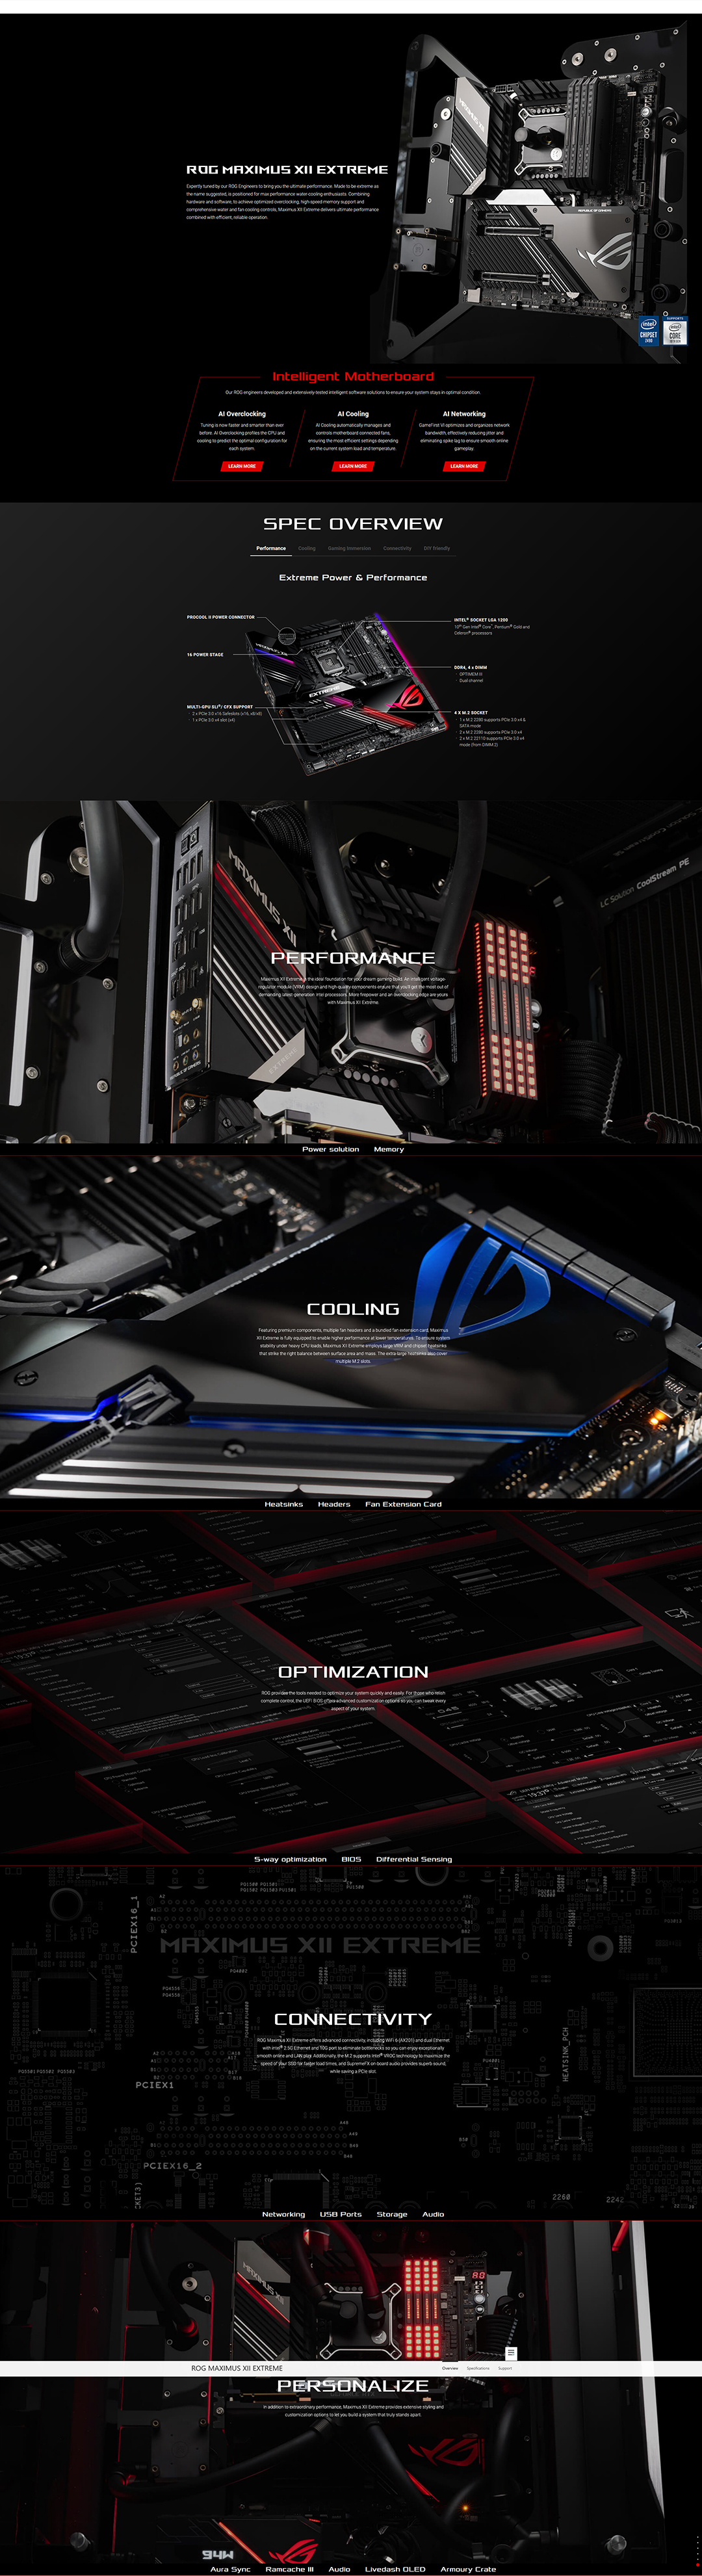 screenshot_2020-05-02-rog-maximus-xii-extreme-motherboards-asus-global